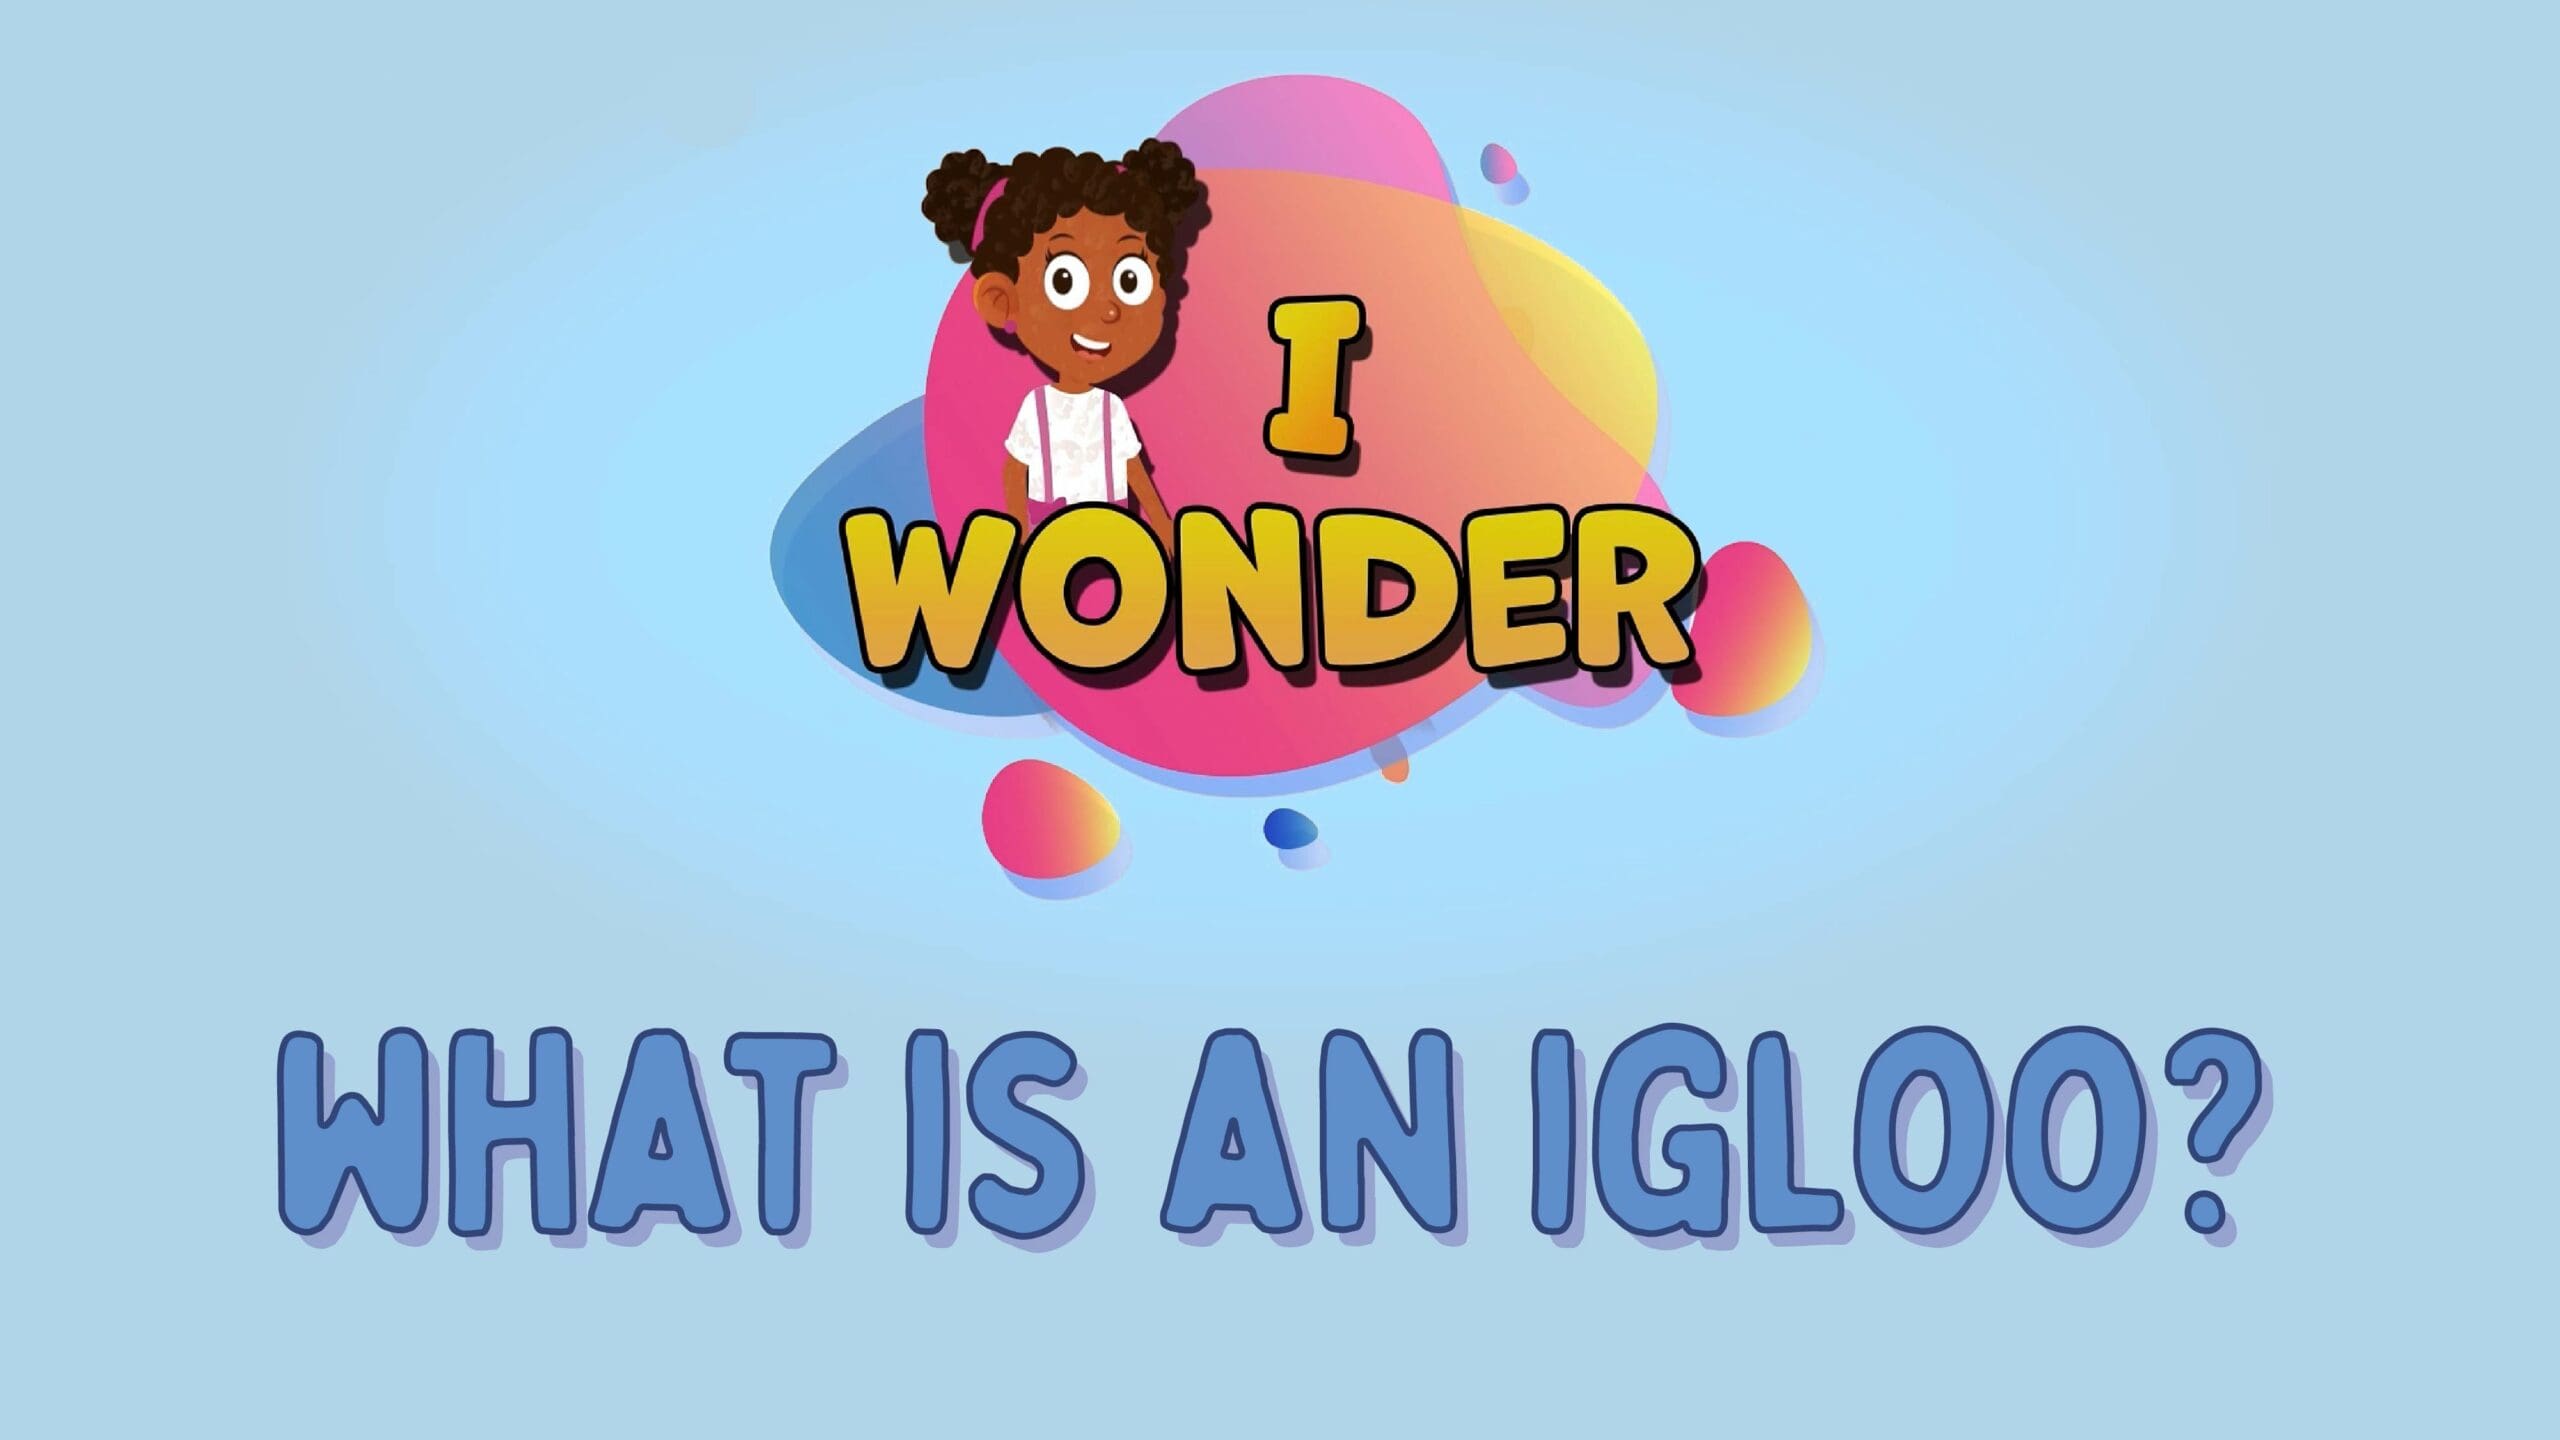 What Is An Igloo?